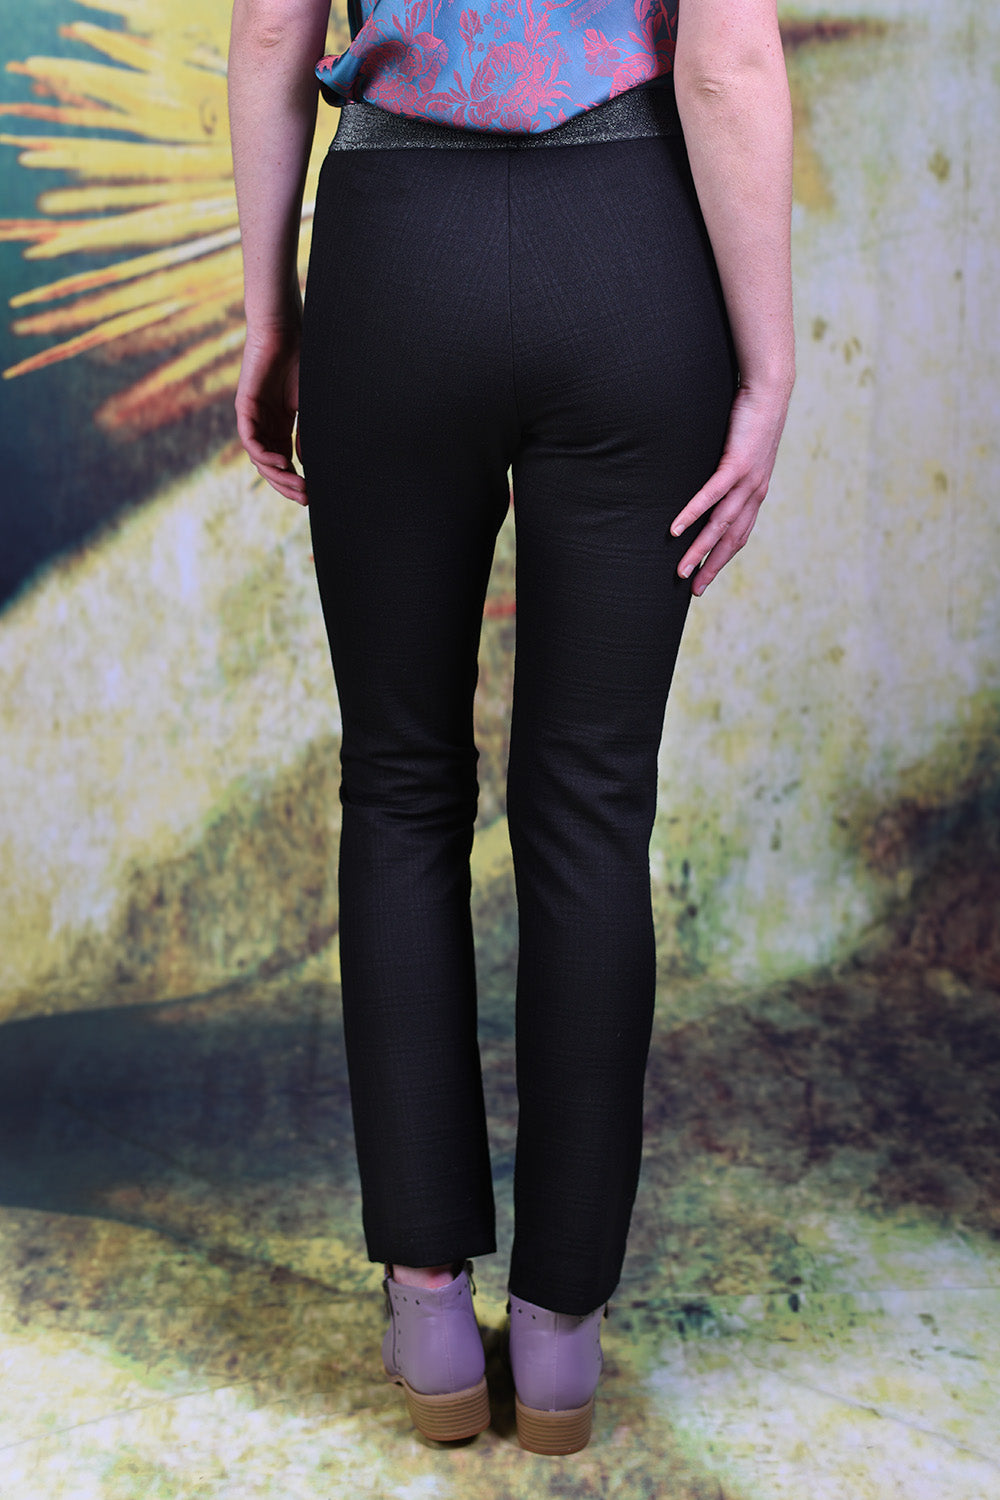 Back of the model wearing the Annah Stretton Vita Paige pants